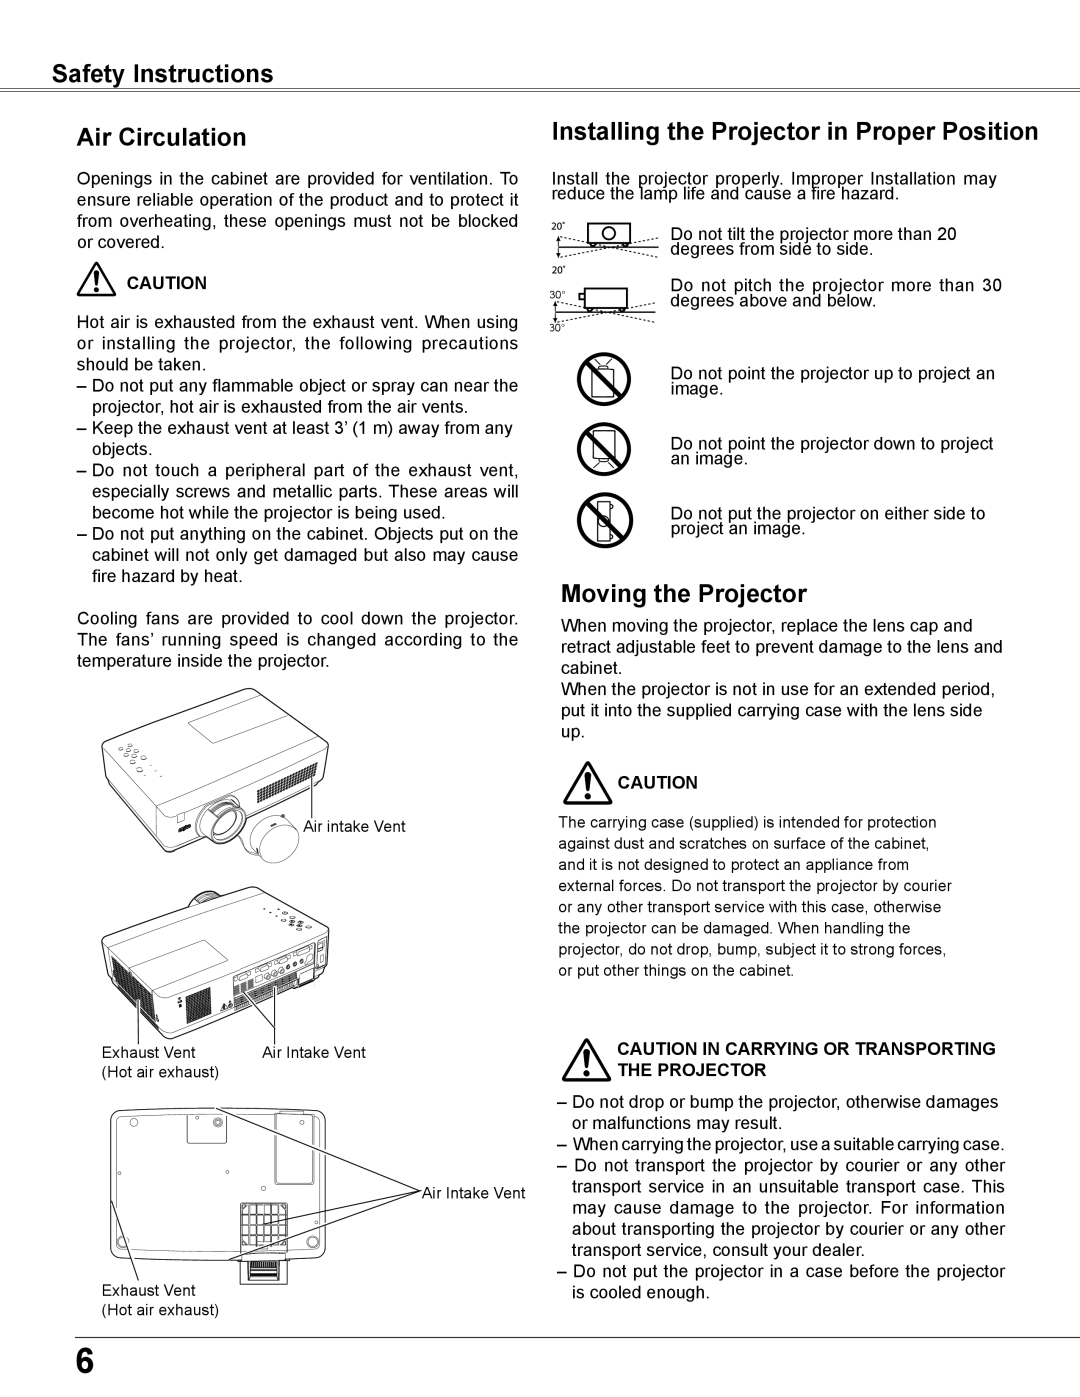 Sanyo PLC-XU355A Safety Instructions Air Circulation, Installing the Projector in Proper Position, Moving the Projector 